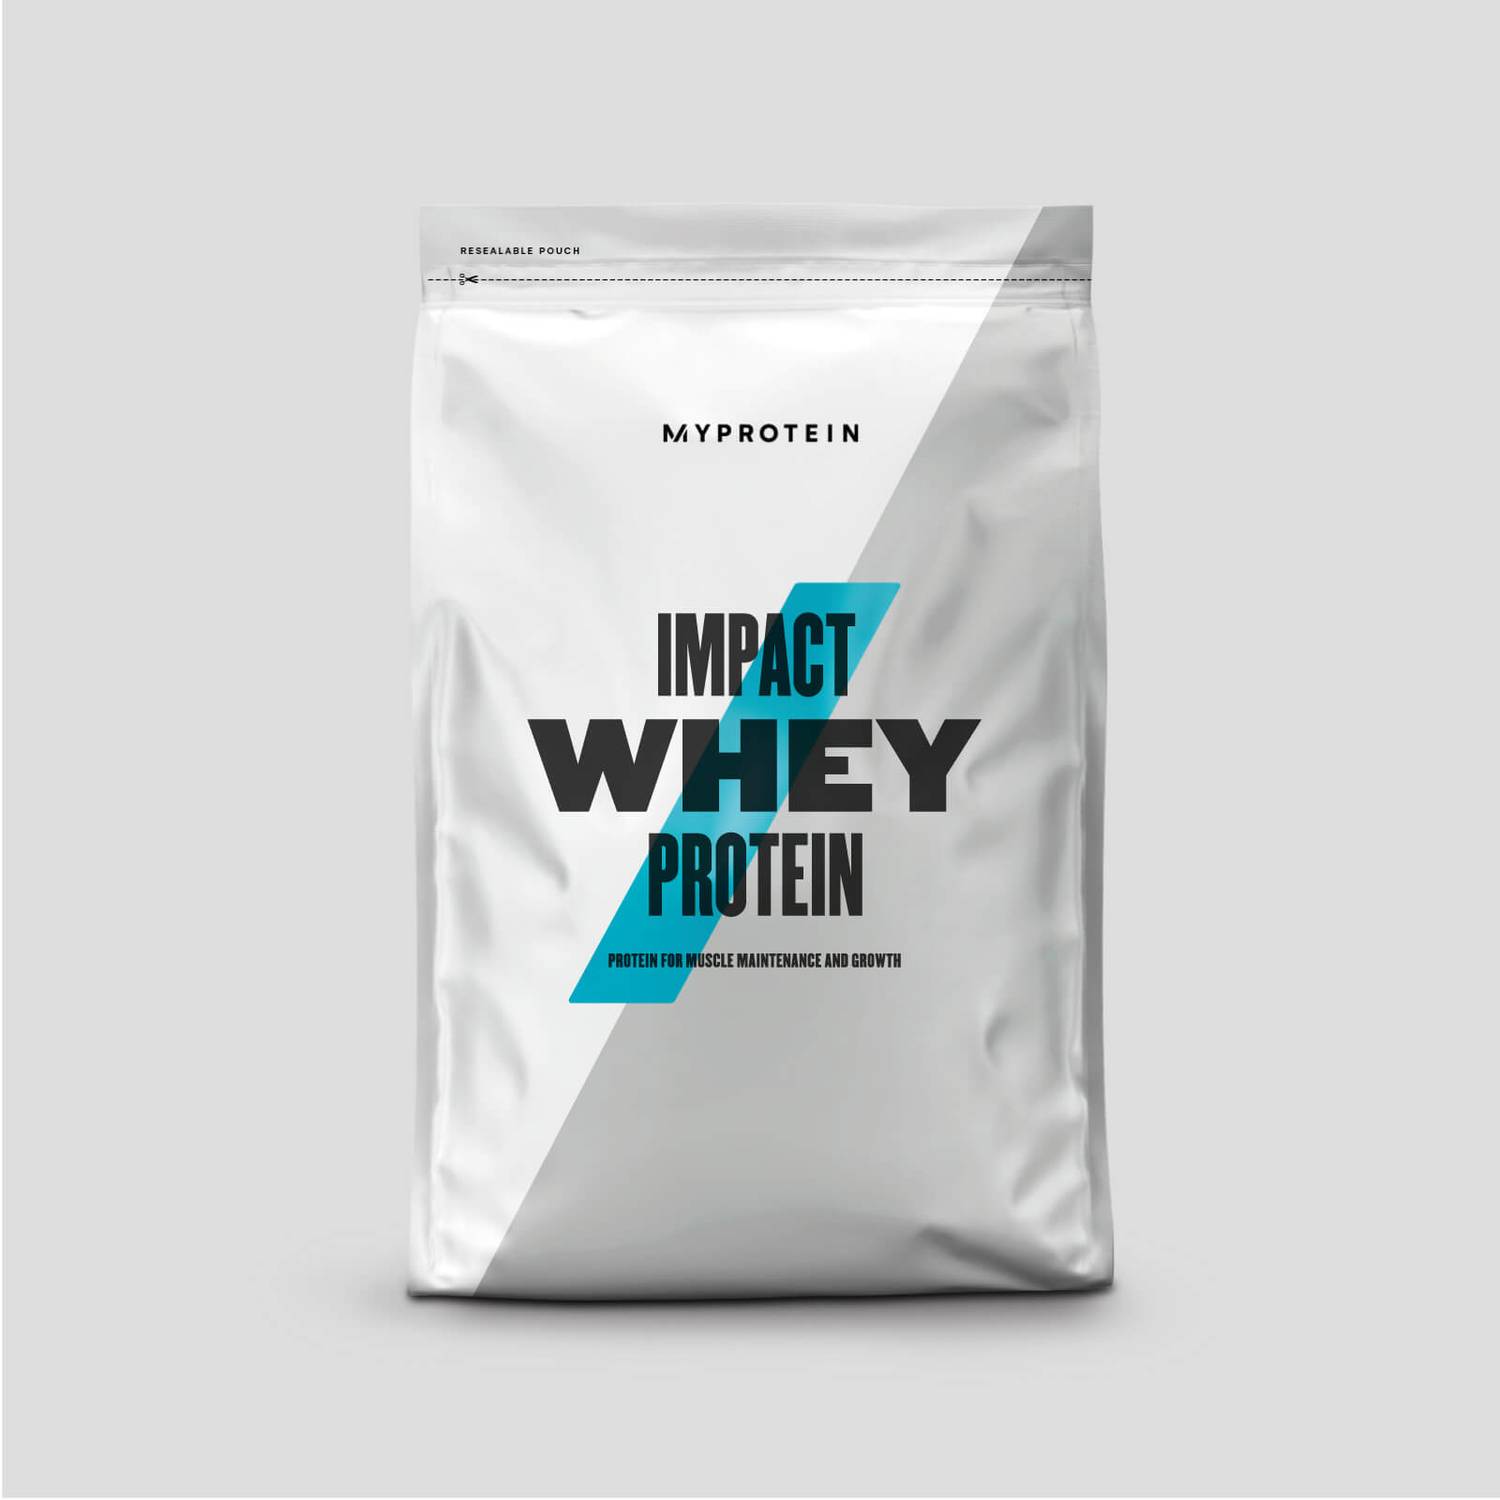 Impact Whey protein review